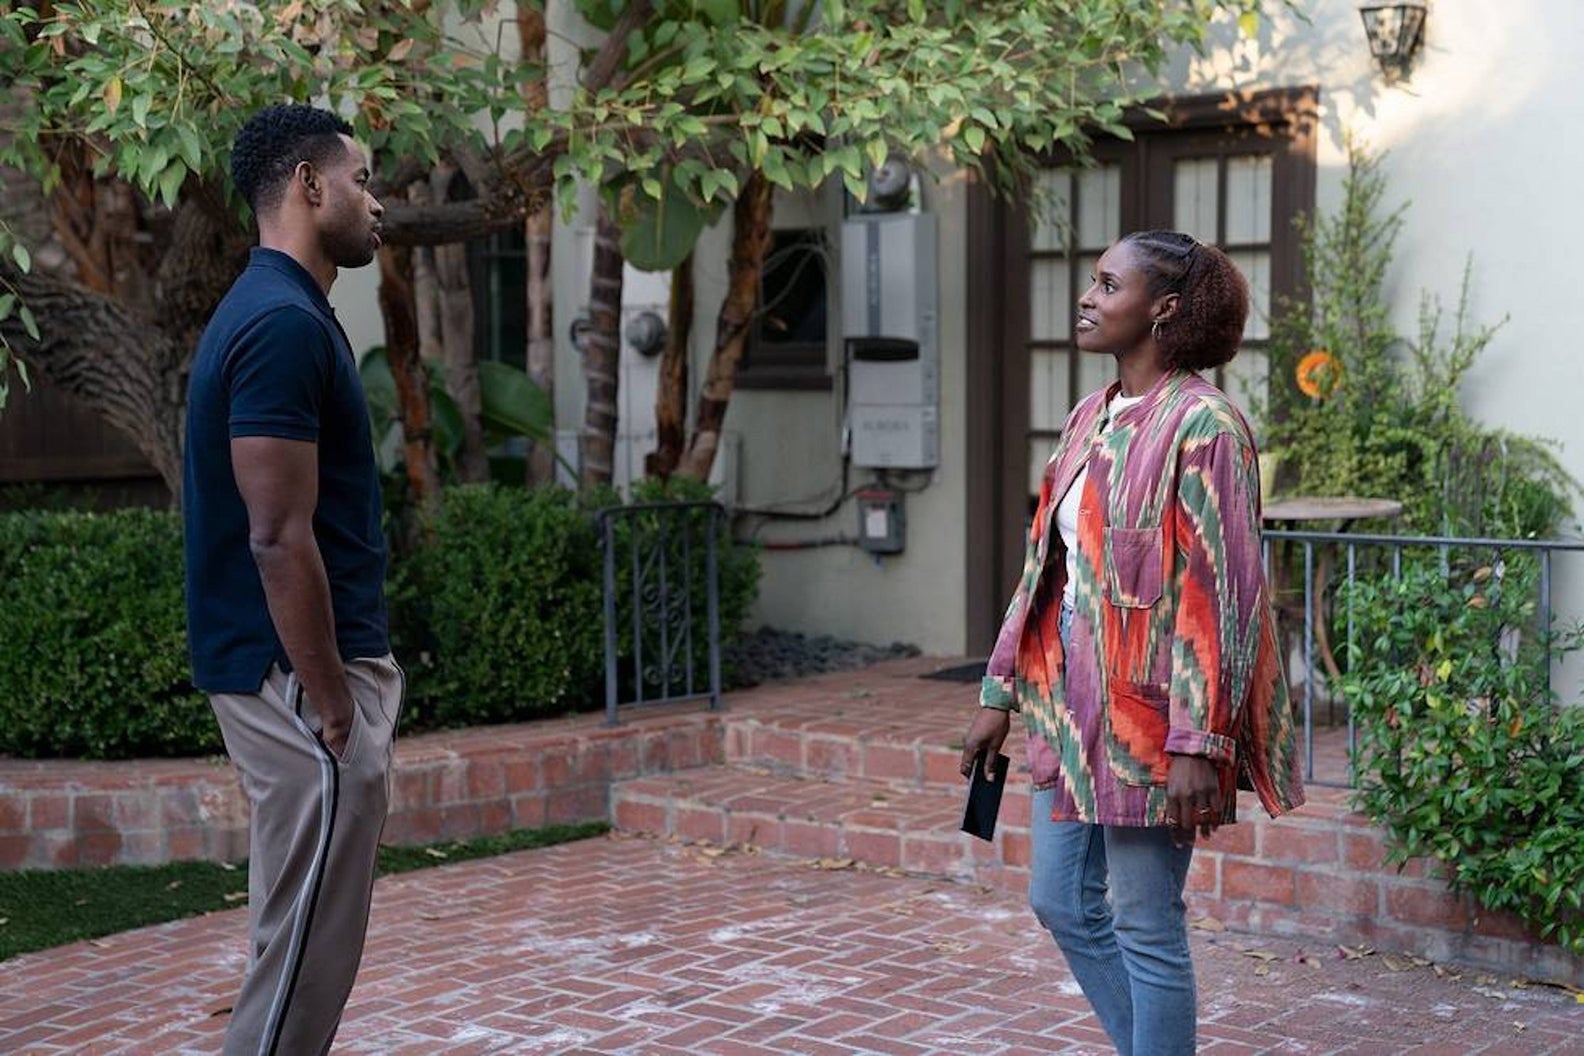 Check Out These Never-Before-Seen Images of 'Insecure' Season Four